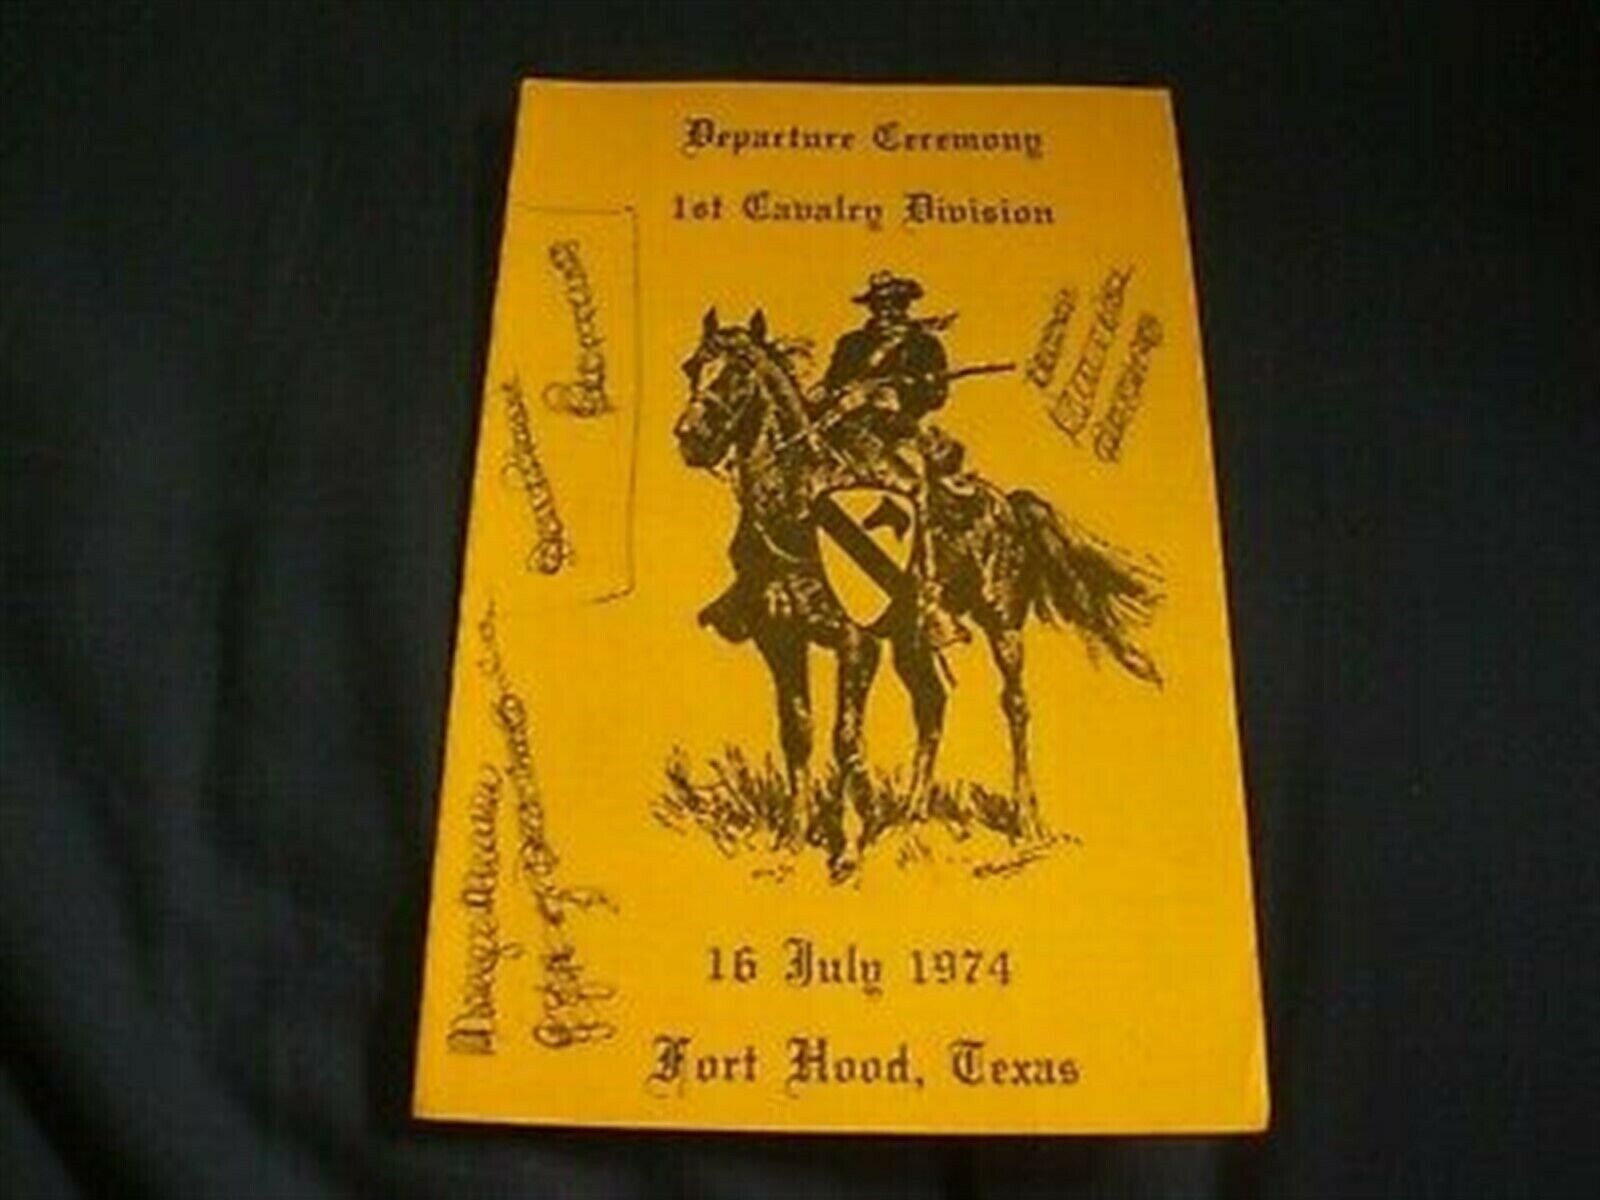 1st CAVALRY DIVISION - FORT HOOD - Departure Ceremony -  16 July 1974